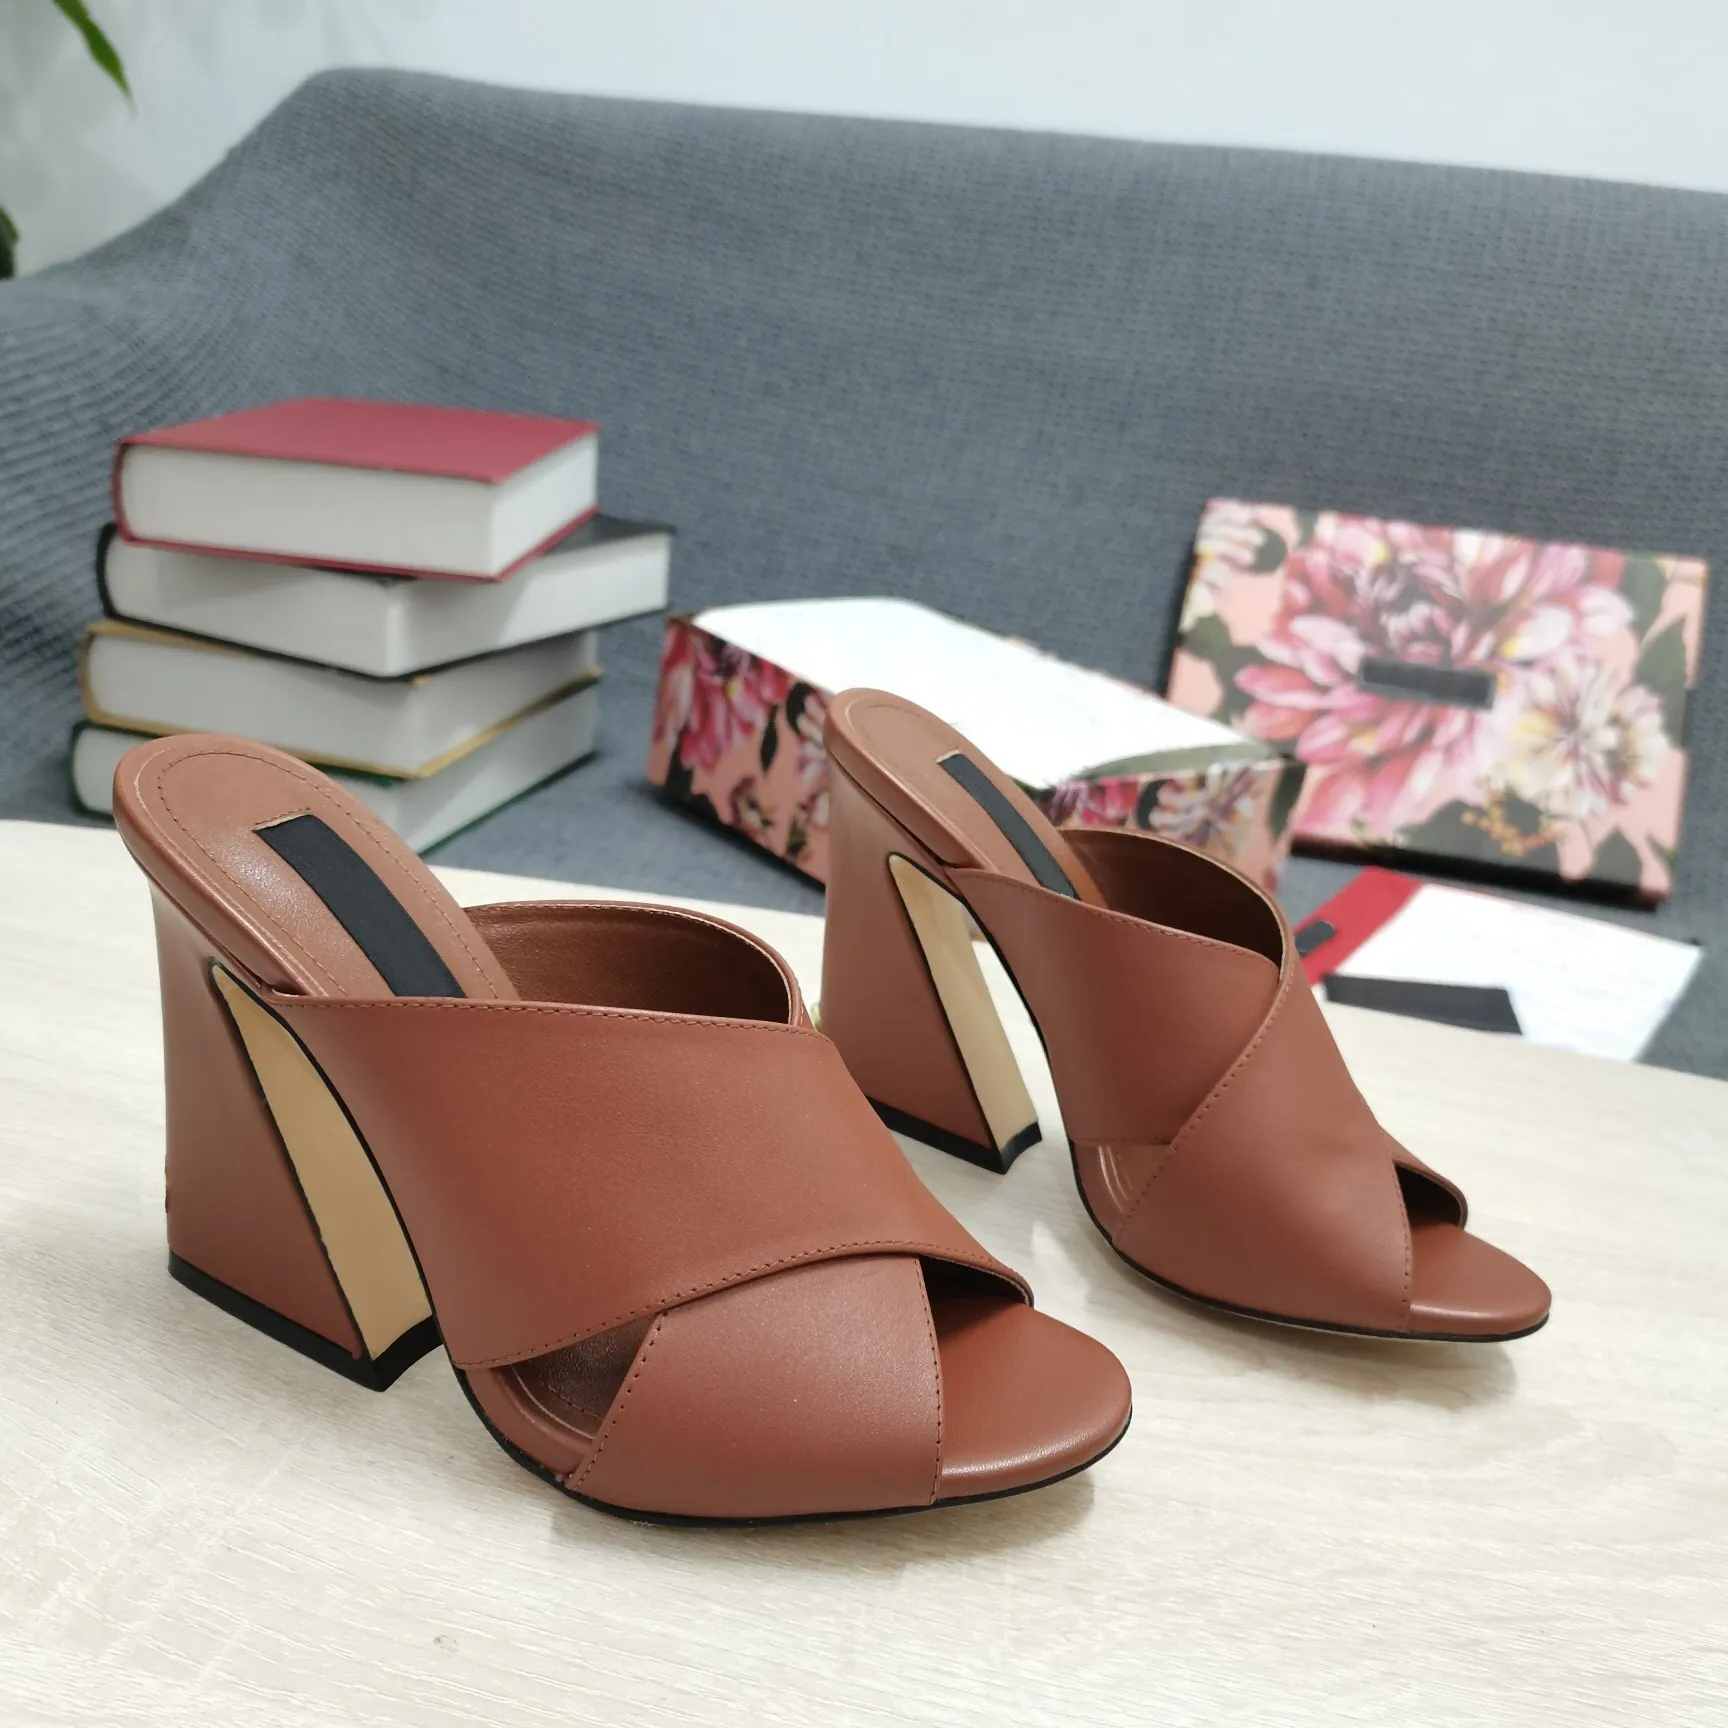 10A Highest quality calfskin high heeled Sandals Designer with box luxury slippers fashion single light colors summer slipper large size 35-43 DG07